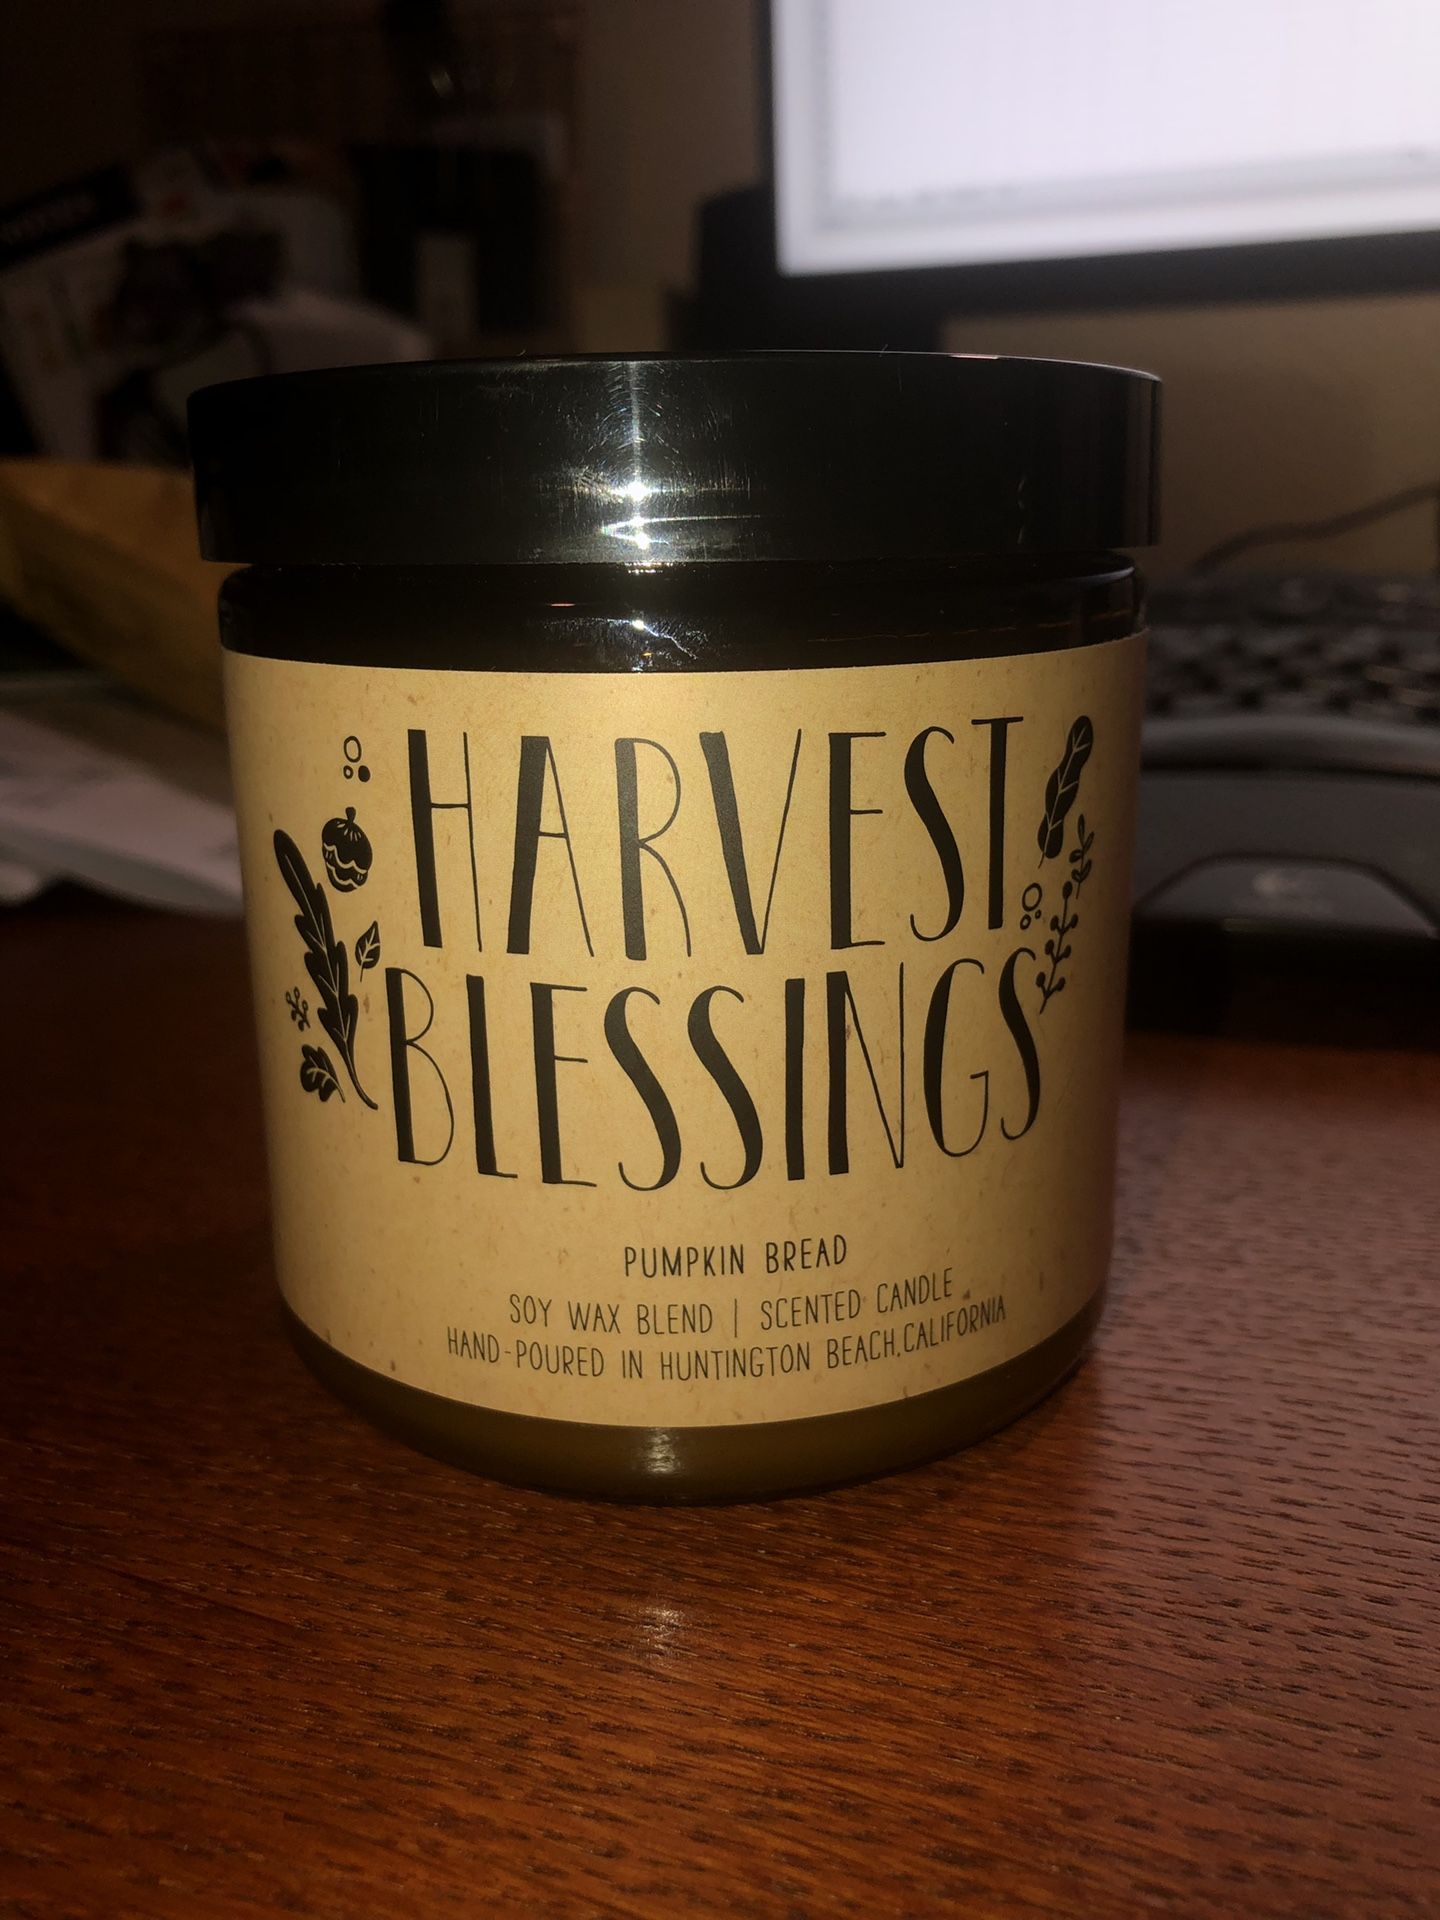 Soy Harvest Blessings, pumpkin bread candle